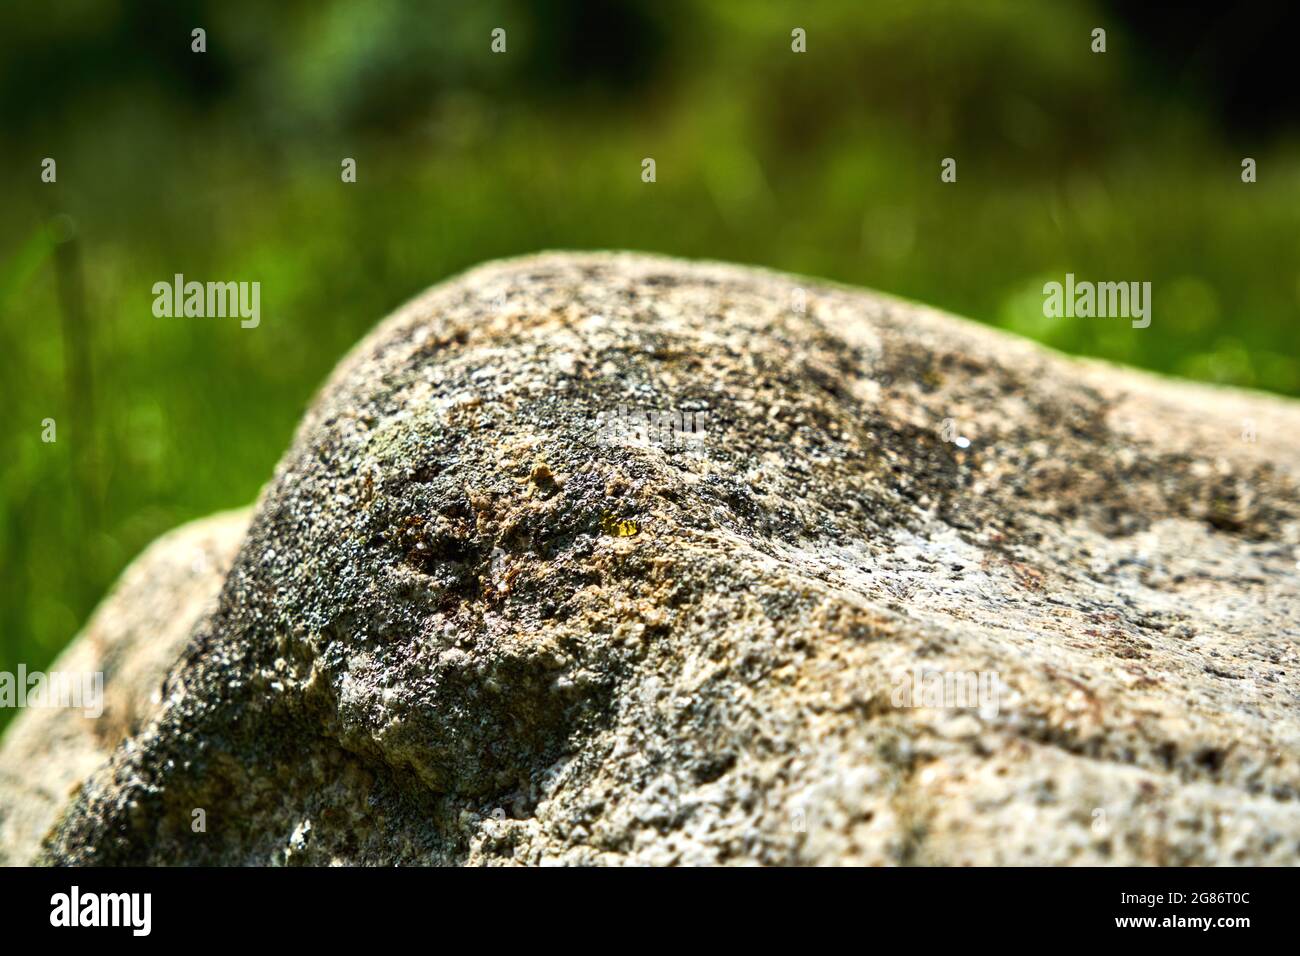 Edge-rounded rock of granite, heavily weathered with a crust of manganese oxide and iron compounds, selective focus, blurred background, isolated Stock Photo